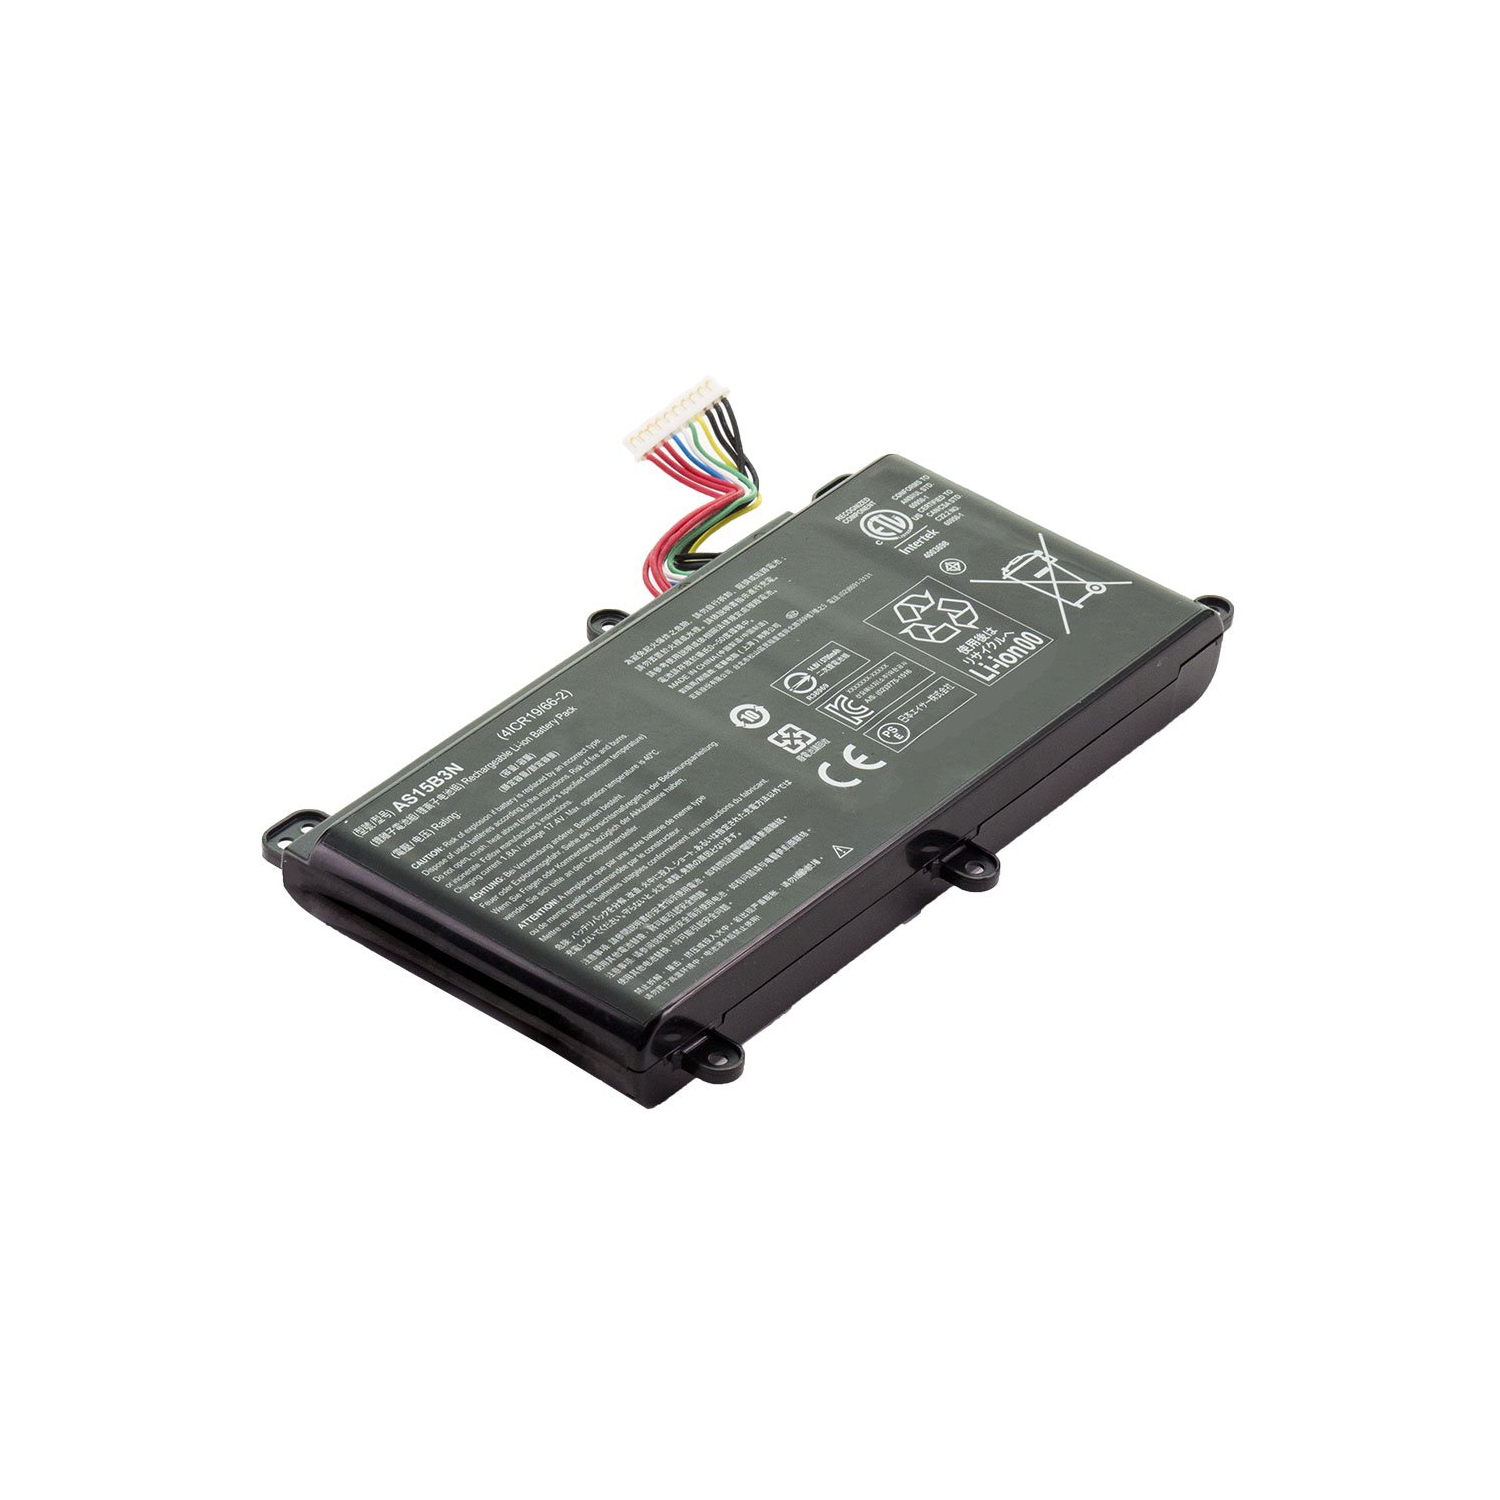 Laptop Battery Replacement for Acer Predator 17 G9-793, AS15B3N, KT.00803.004, KT.00803.005